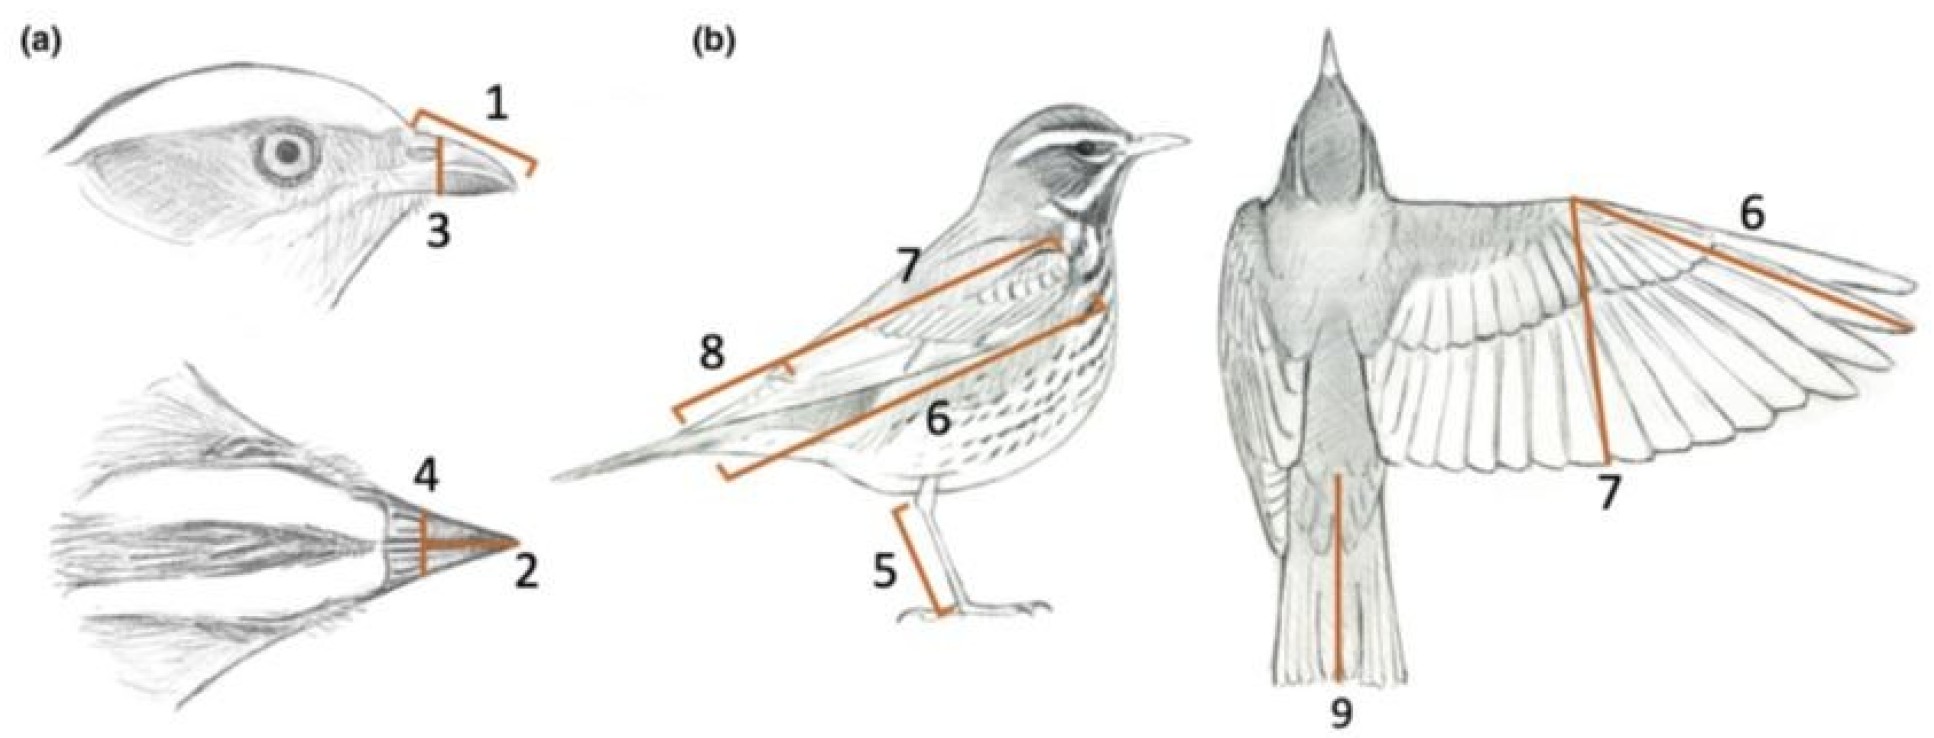 Sketches of birds with labels for measurements of their wings, legs and beaks